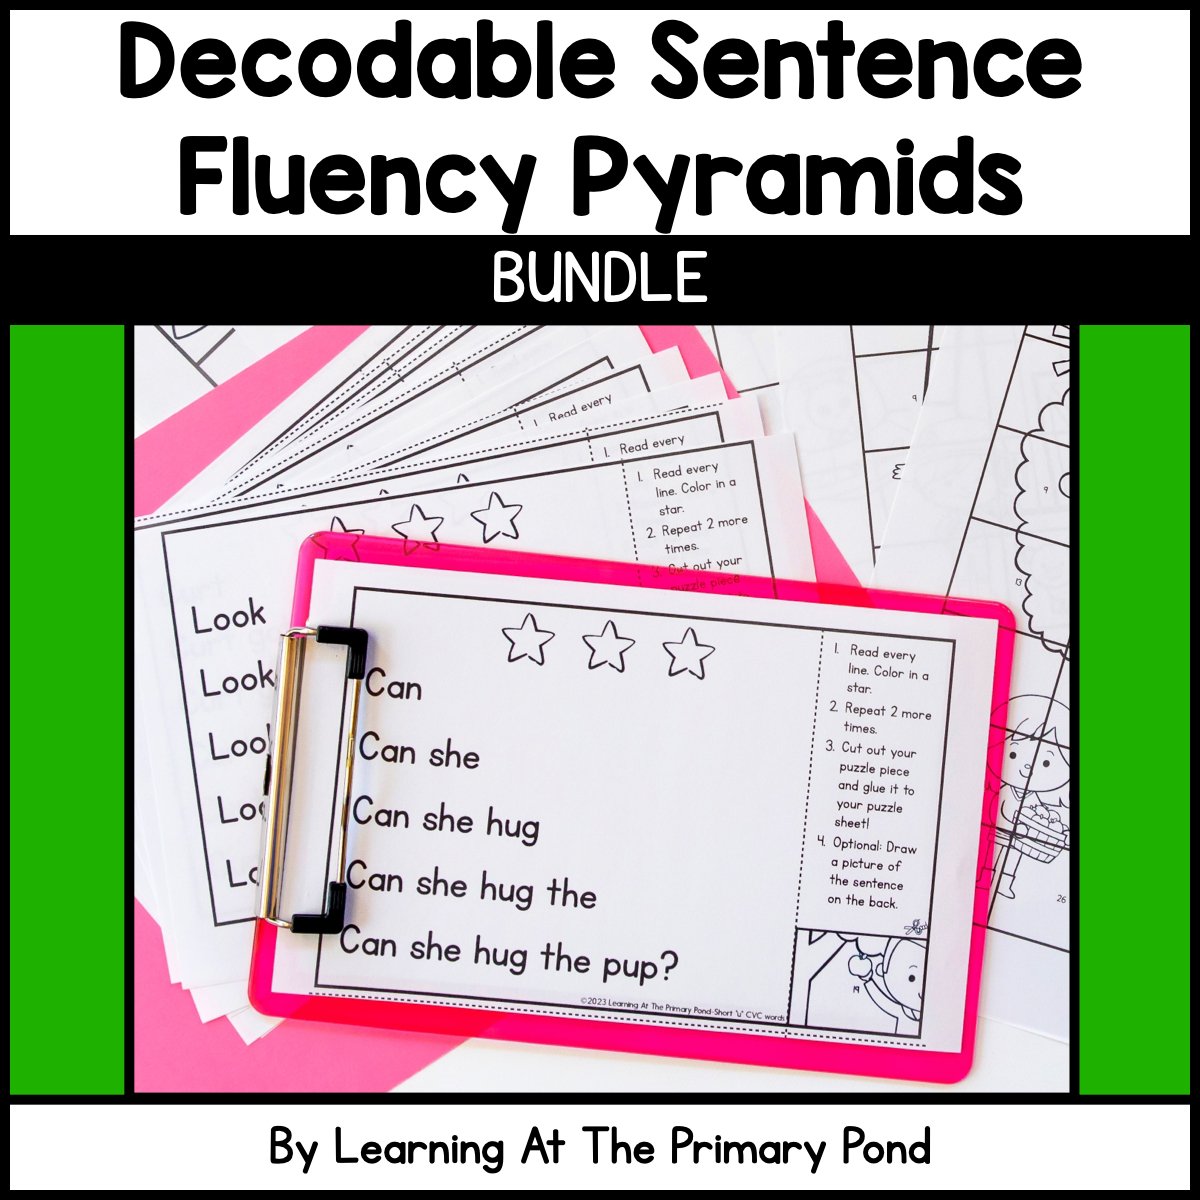 Decodable Sentence Fluency Pyramids | BUNDLE - learning-at-the-primary-pond